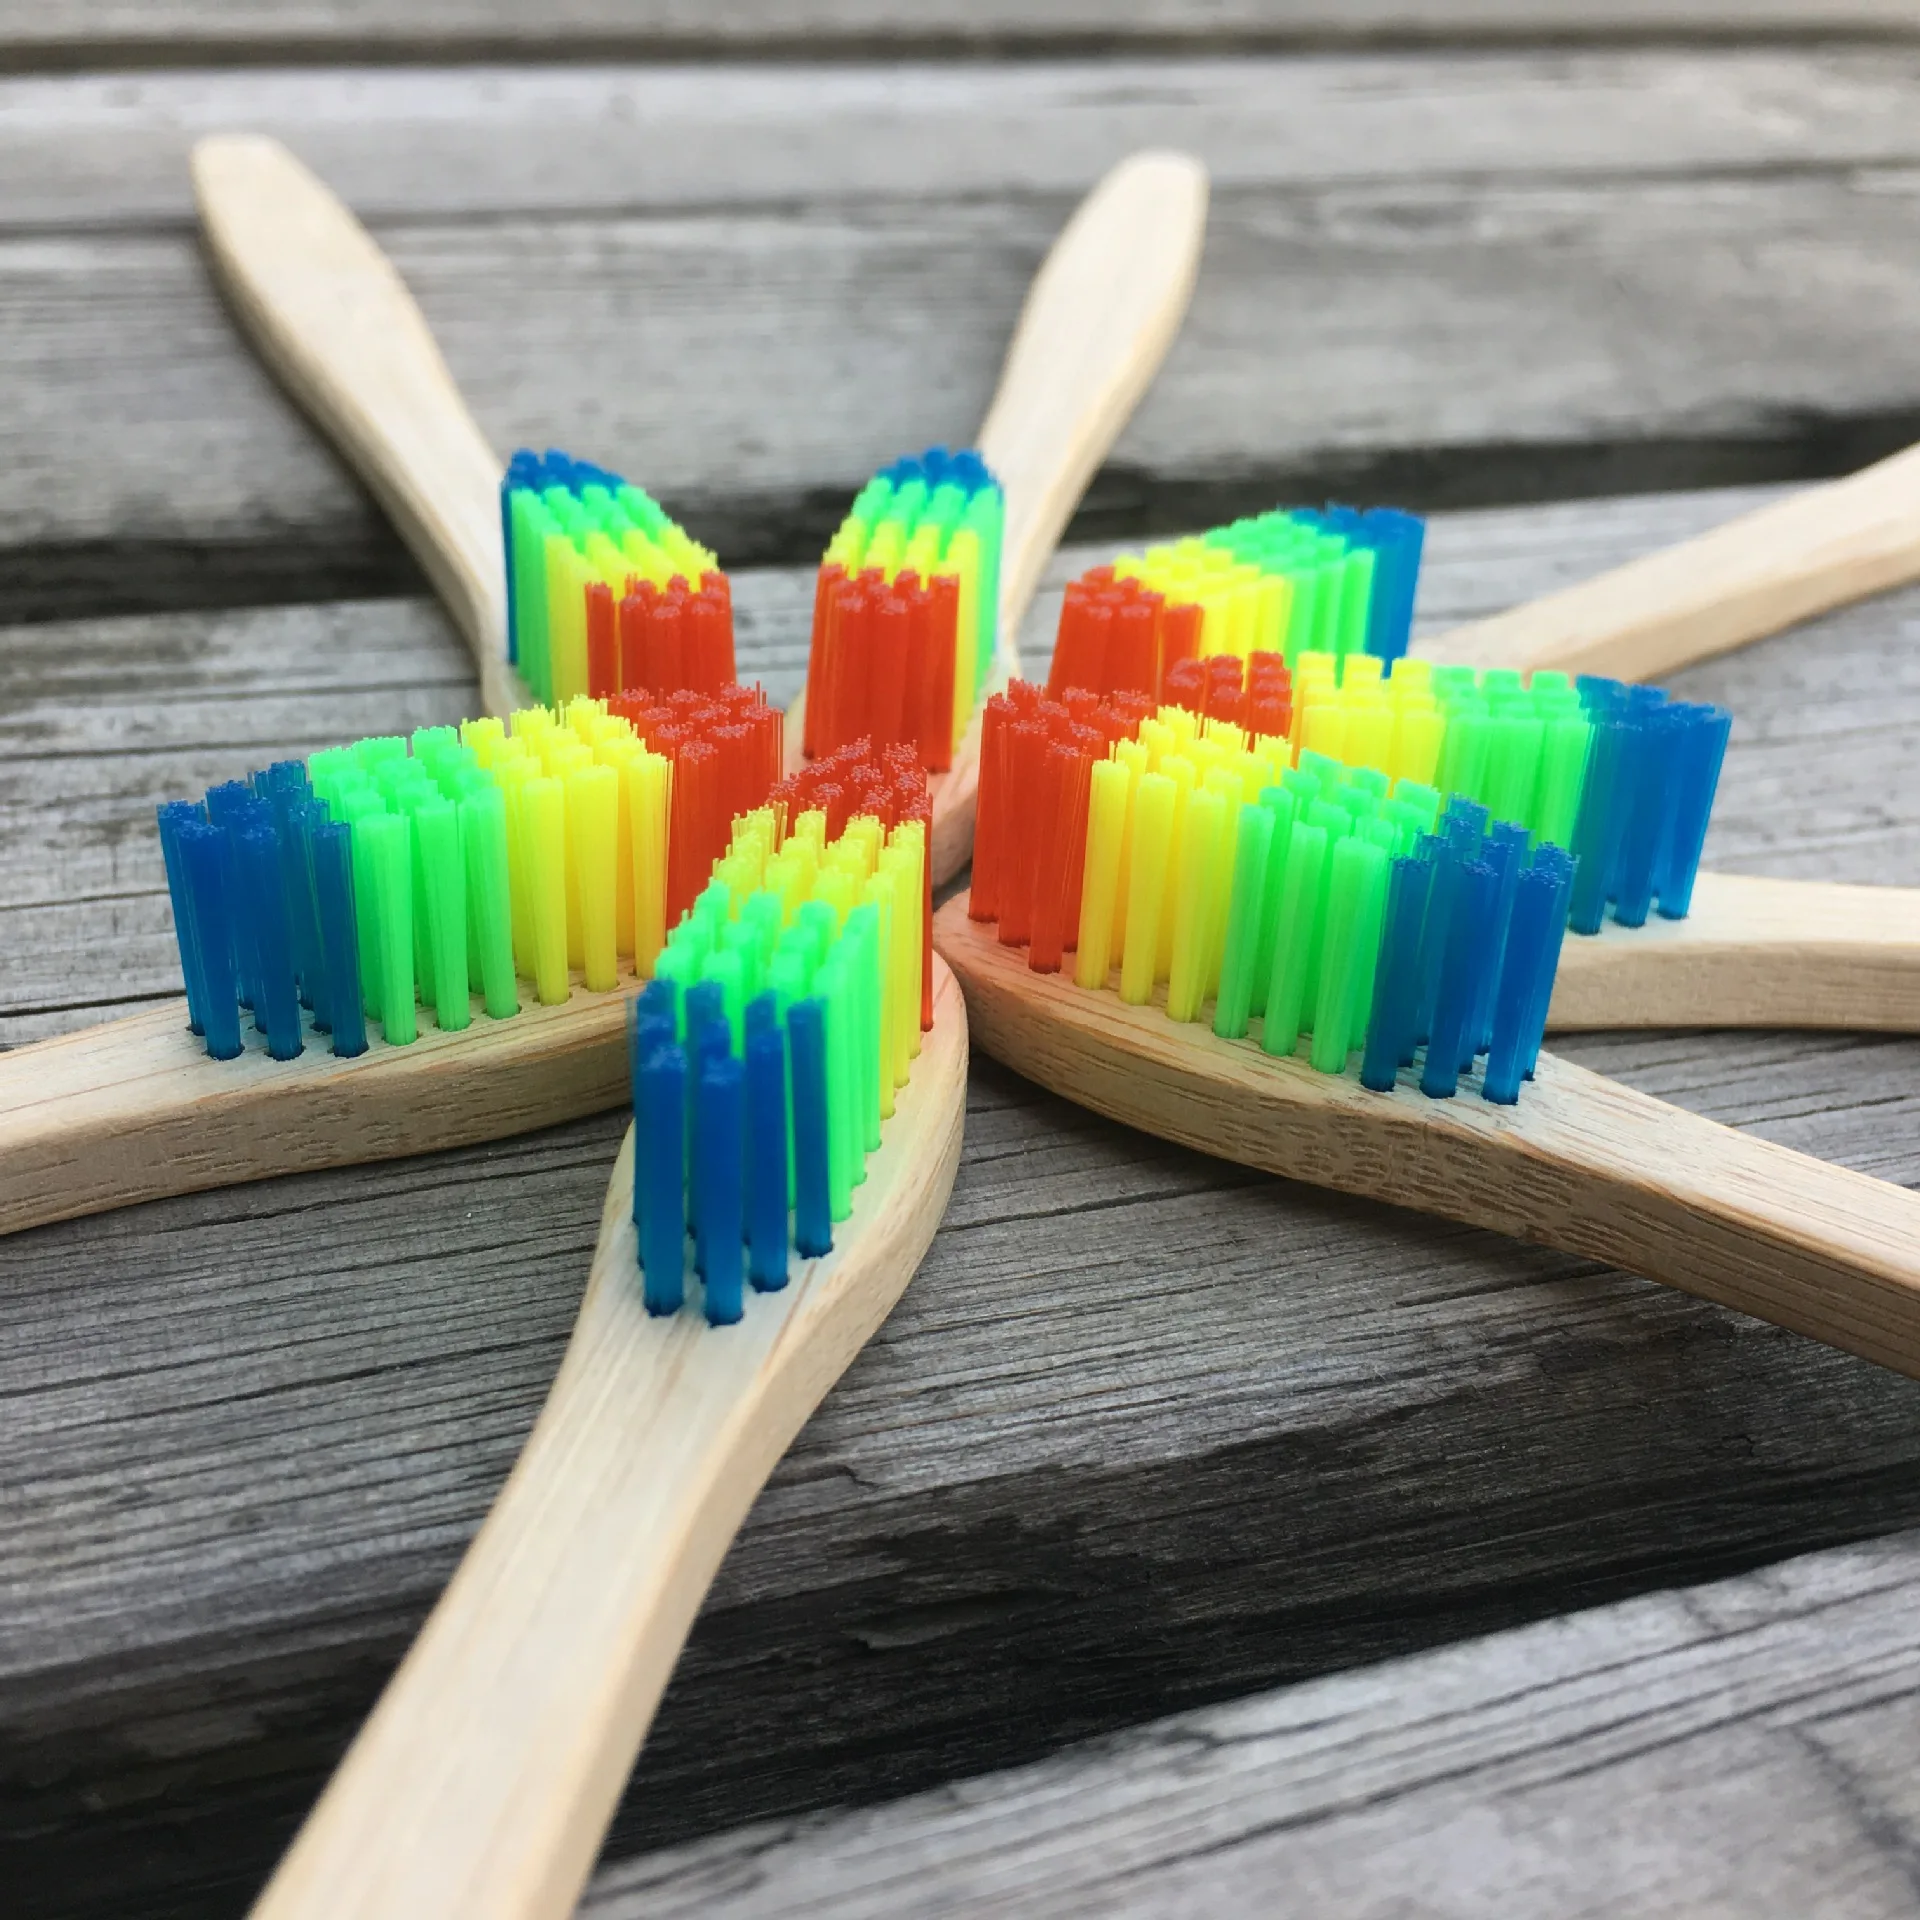 Factory Price Rainbow Toothbrushes Bamboo Toothbrushes Once Kraft Paper Independent Packaging Travel Portable Toothbrushes